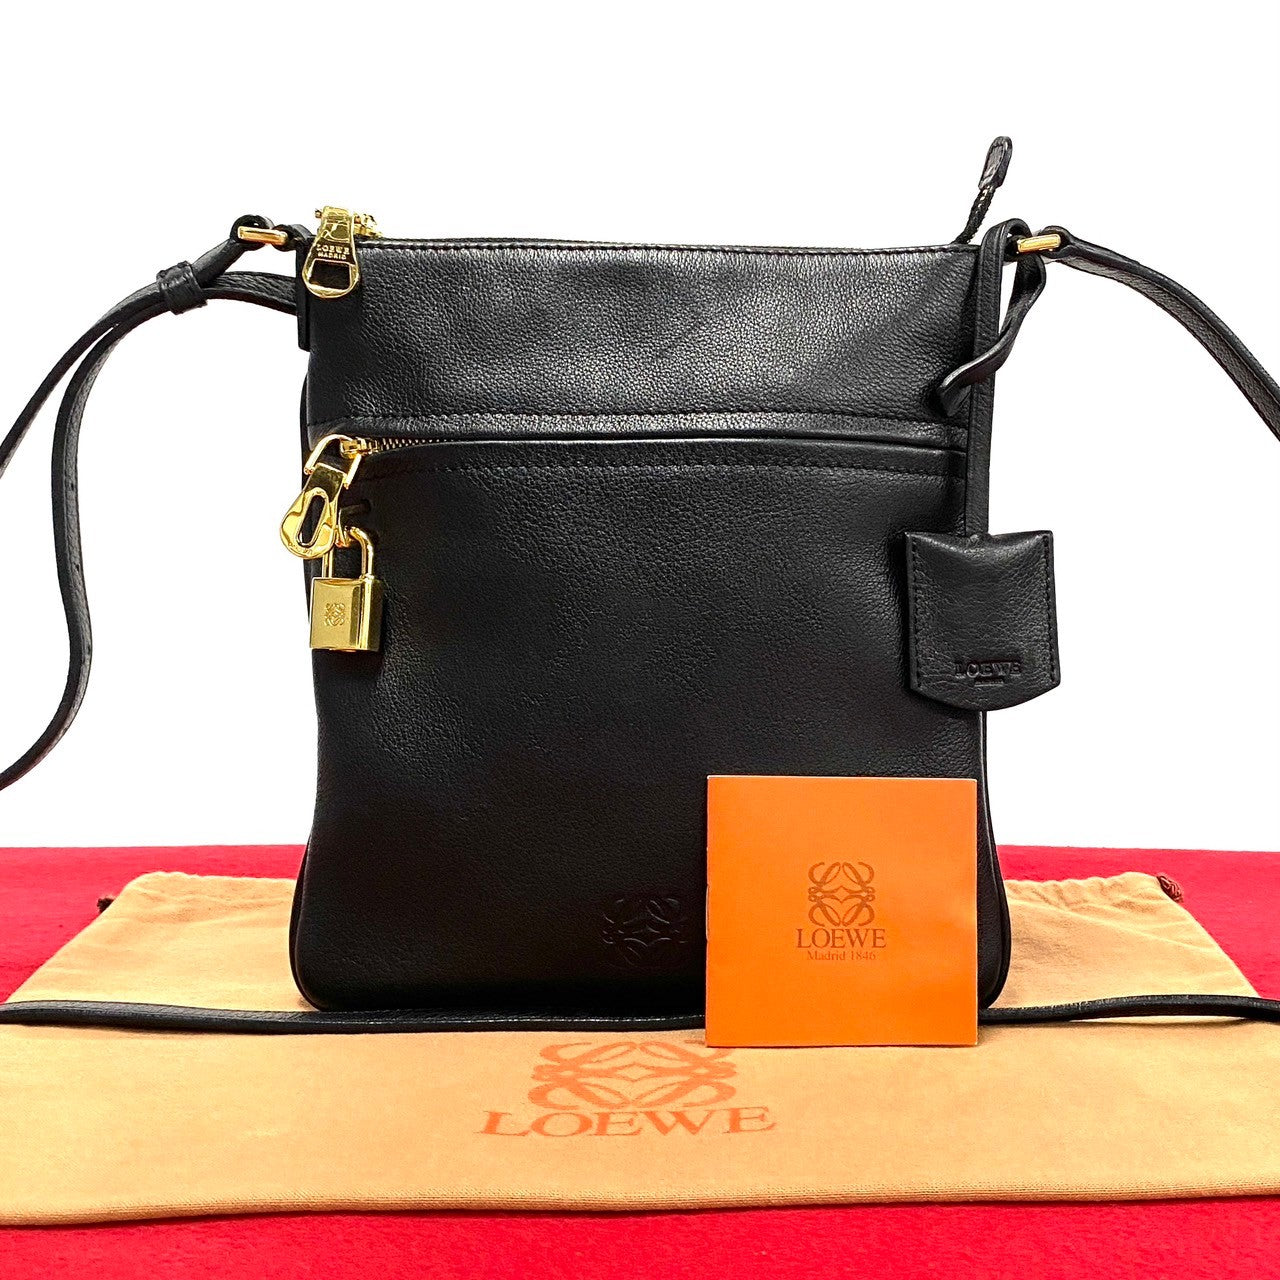 Loewe Leather Crossbody Bag  Leather Crossbody Bag in Excellent condition